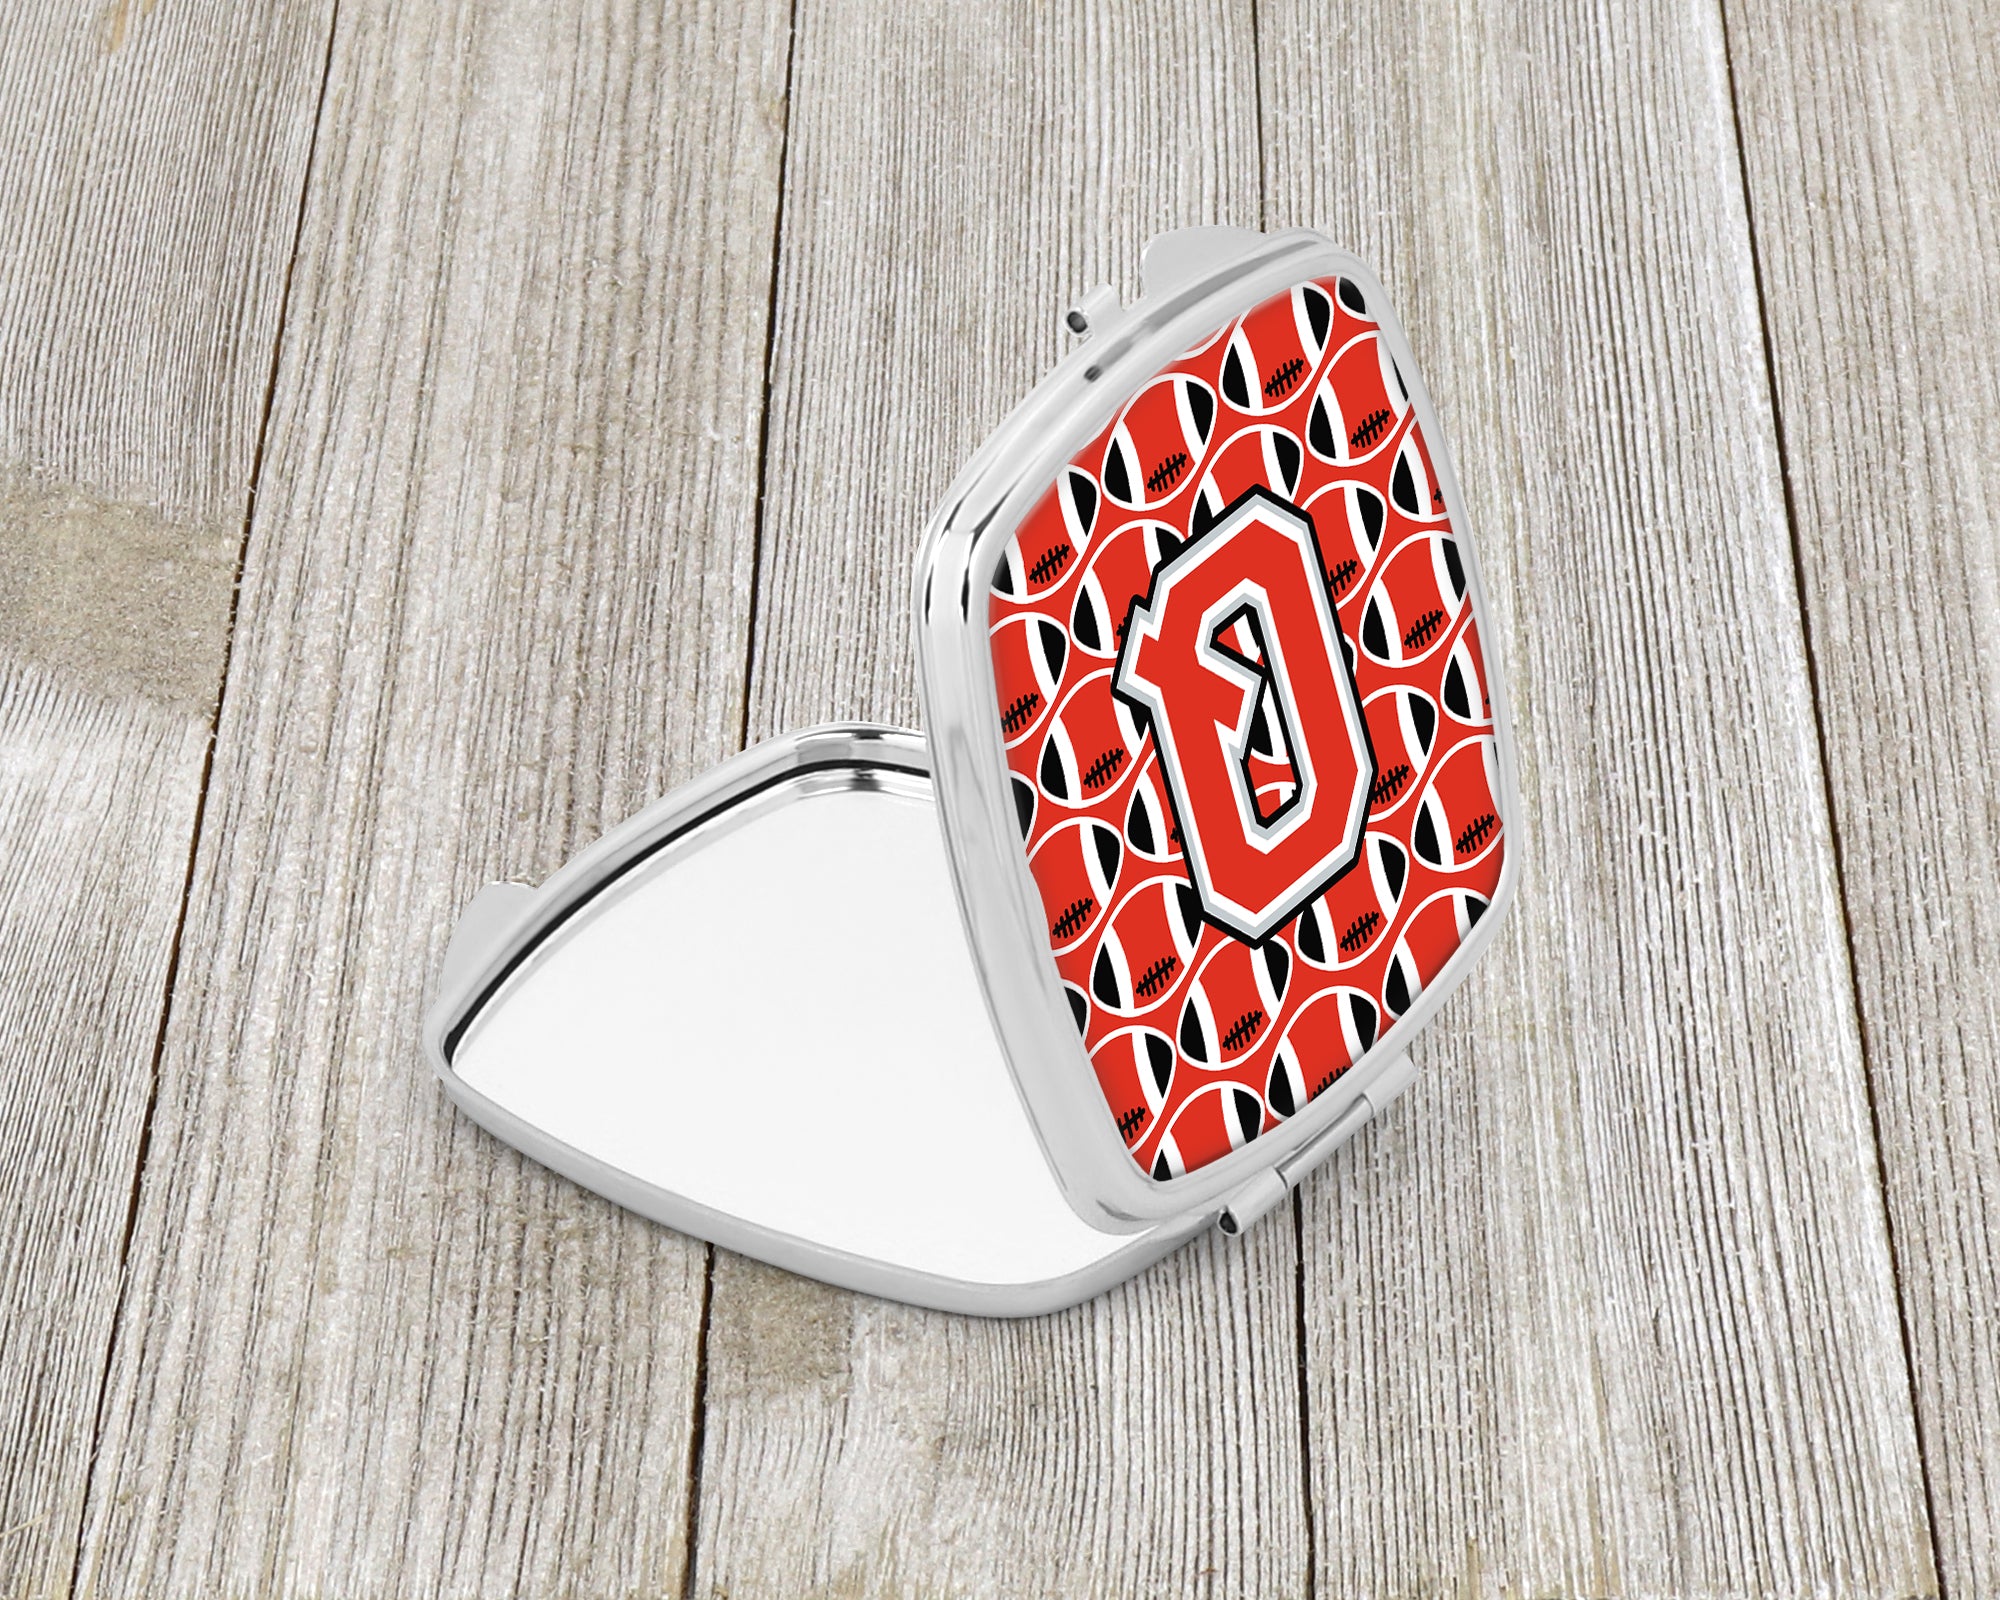 Letter Q Football Scarlet and Grey Compact Mirror CJ1067-QSCM